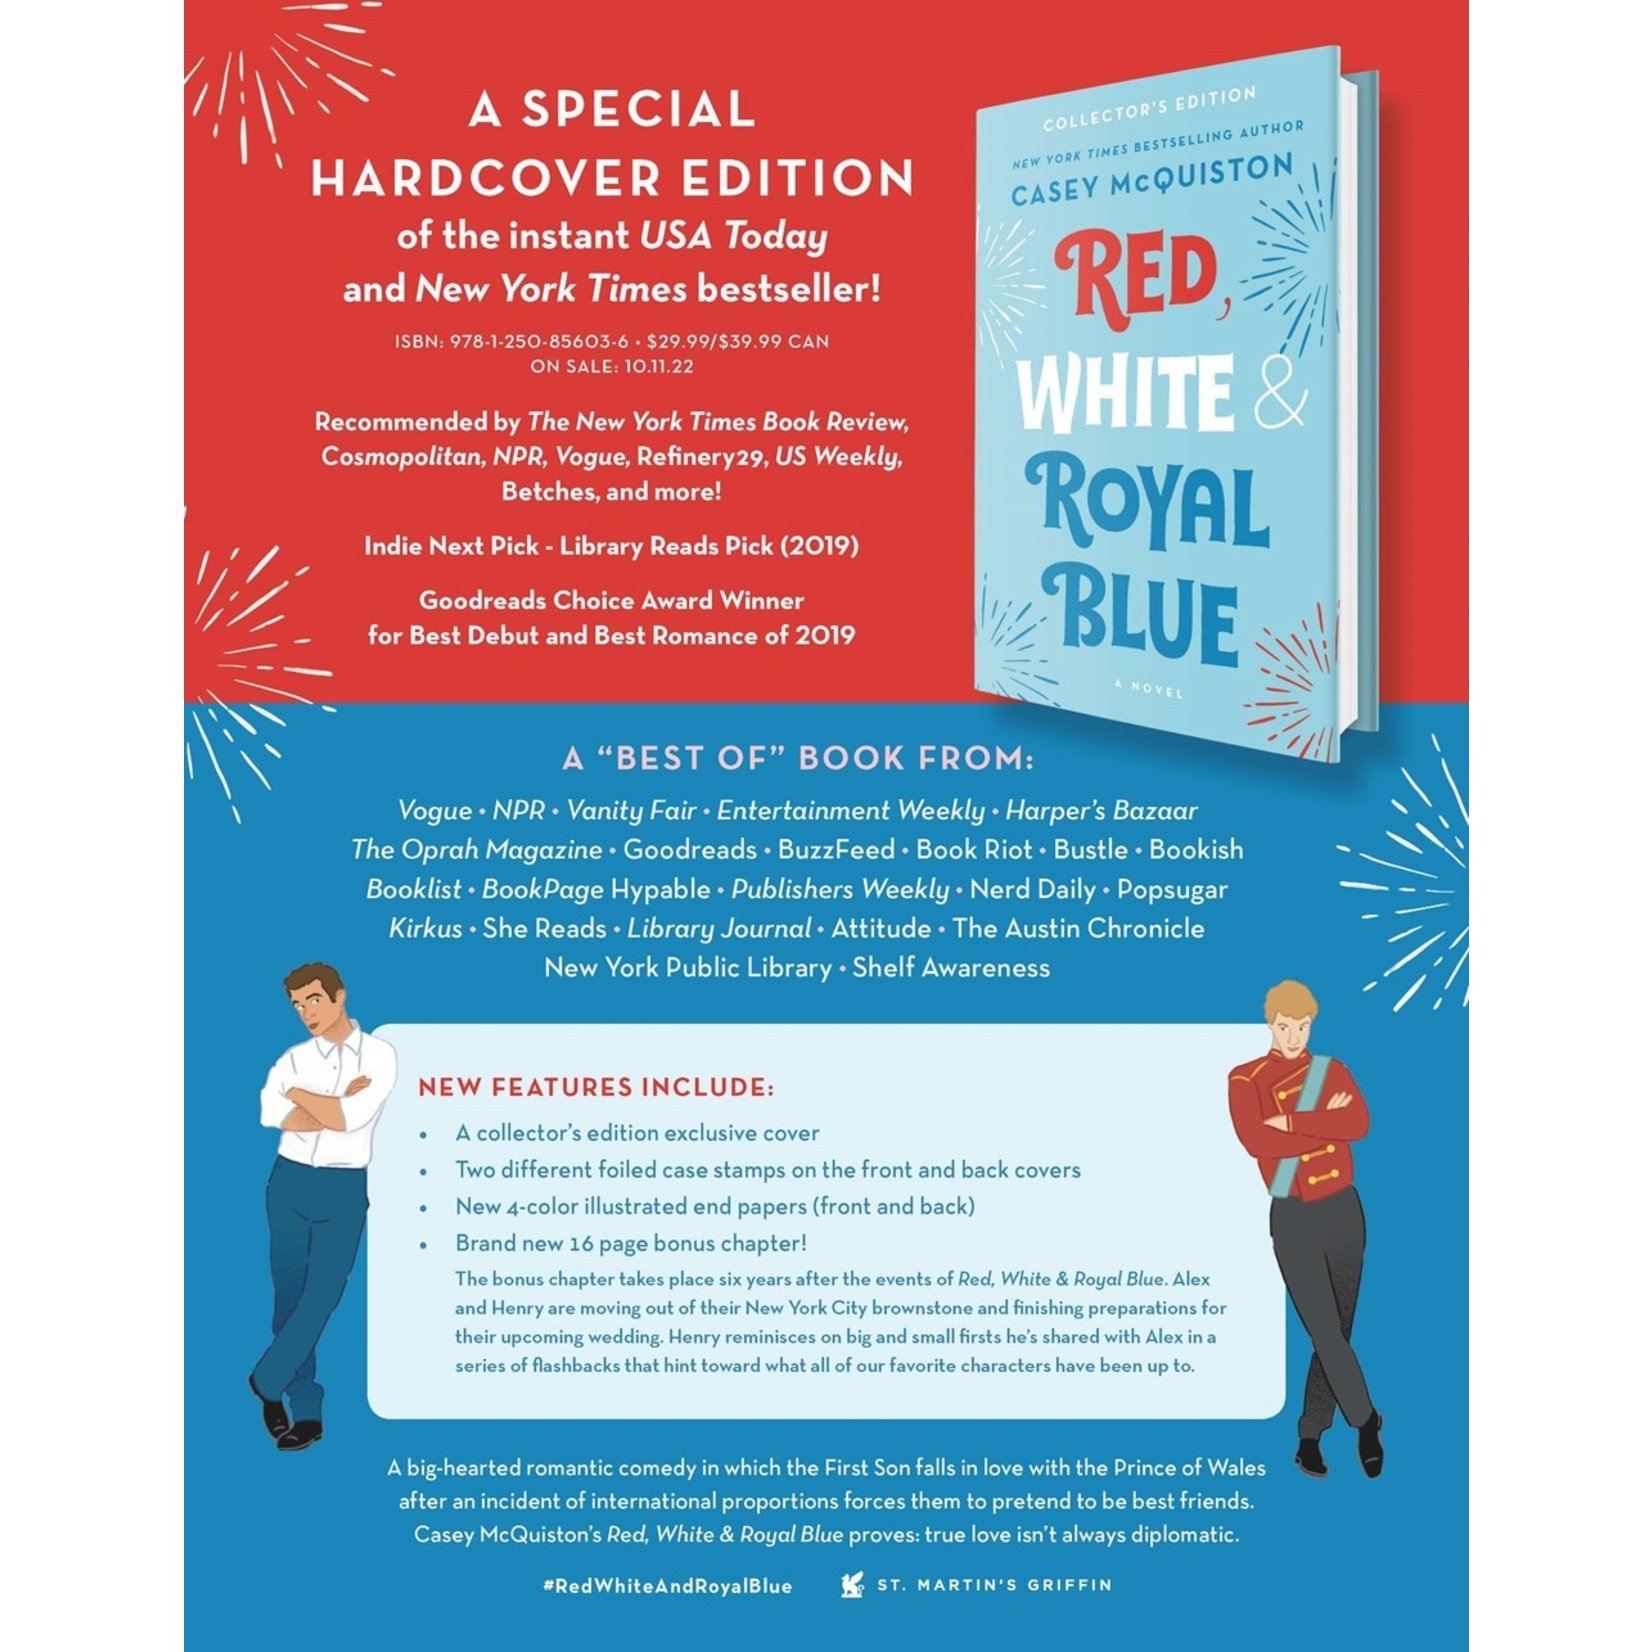 Red, White & Royal Blue: Collector's Edition